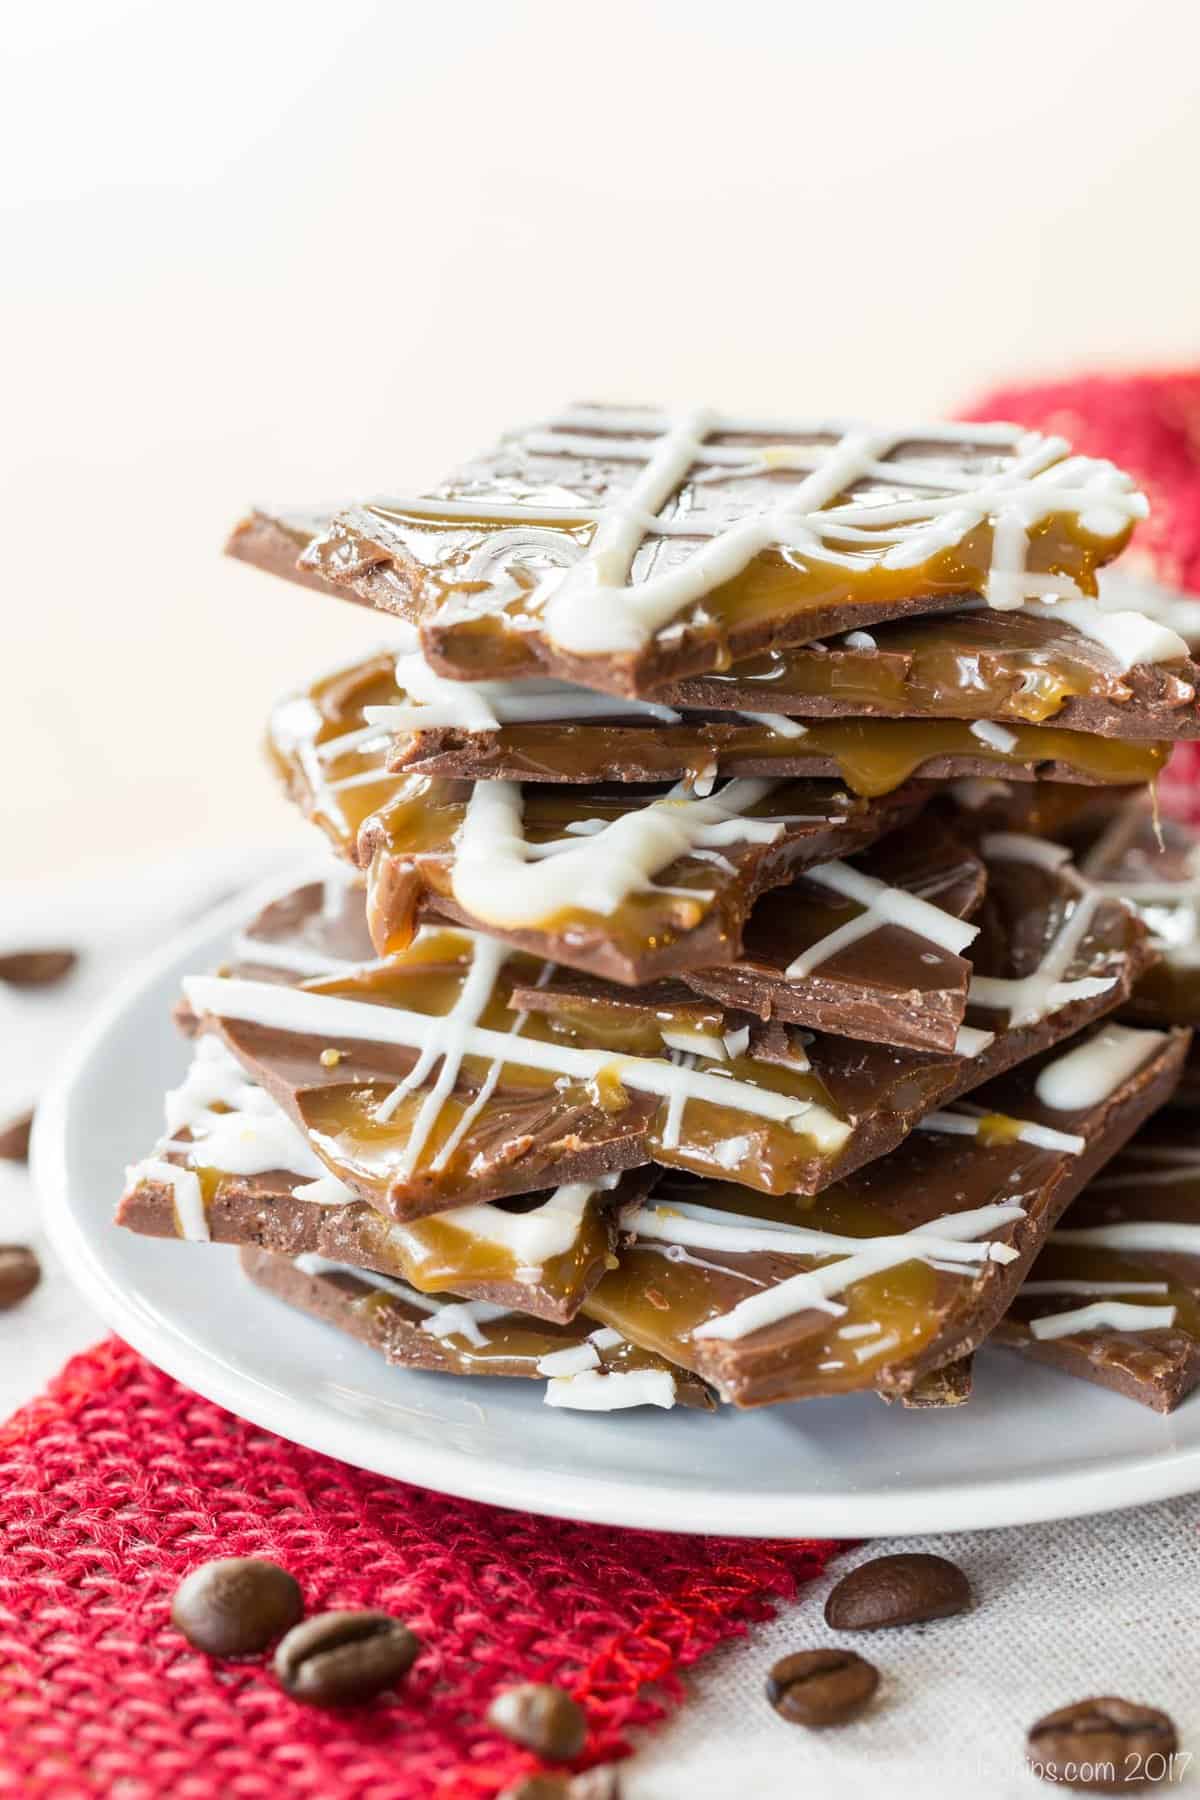 A pile of broken pieces of Salted Caramel Mocha Chocolate Bark on a white plate surrounded by ribbon and coffee beans.